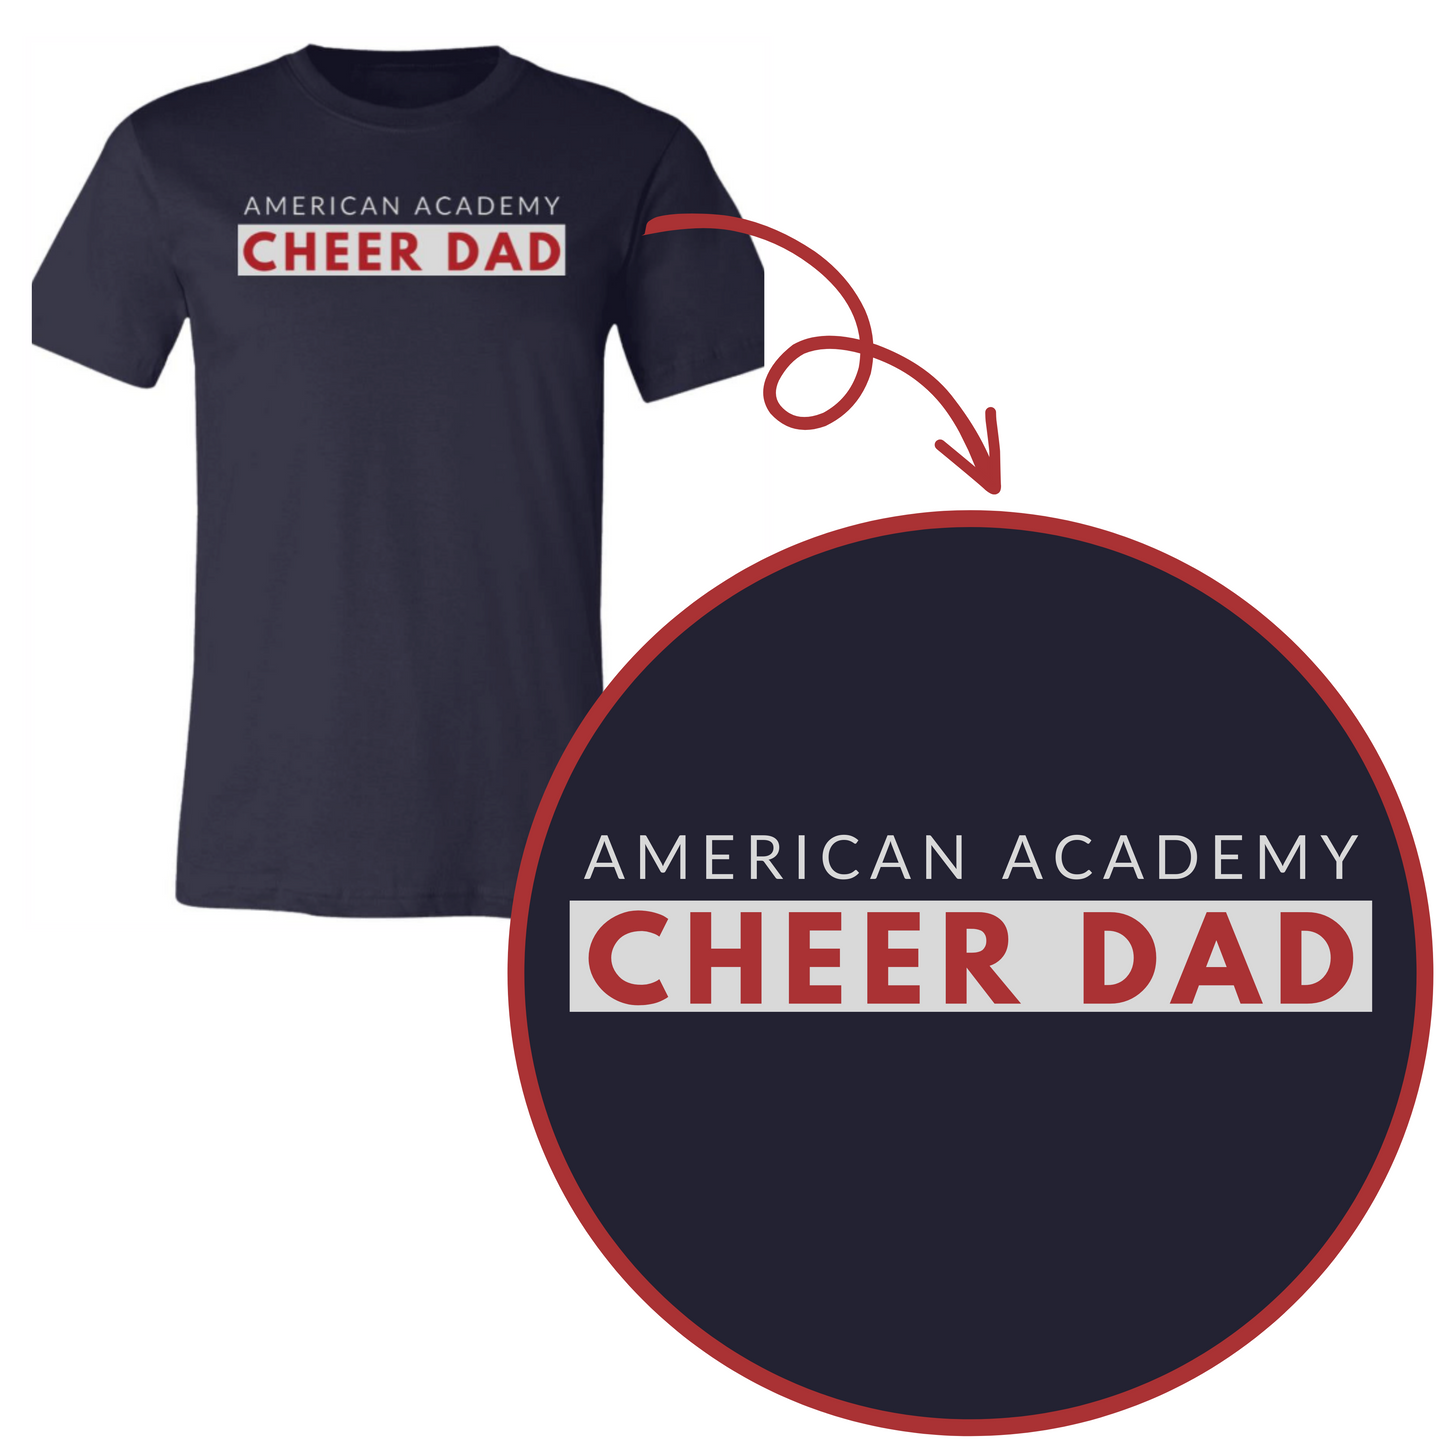 The Cheer Dad